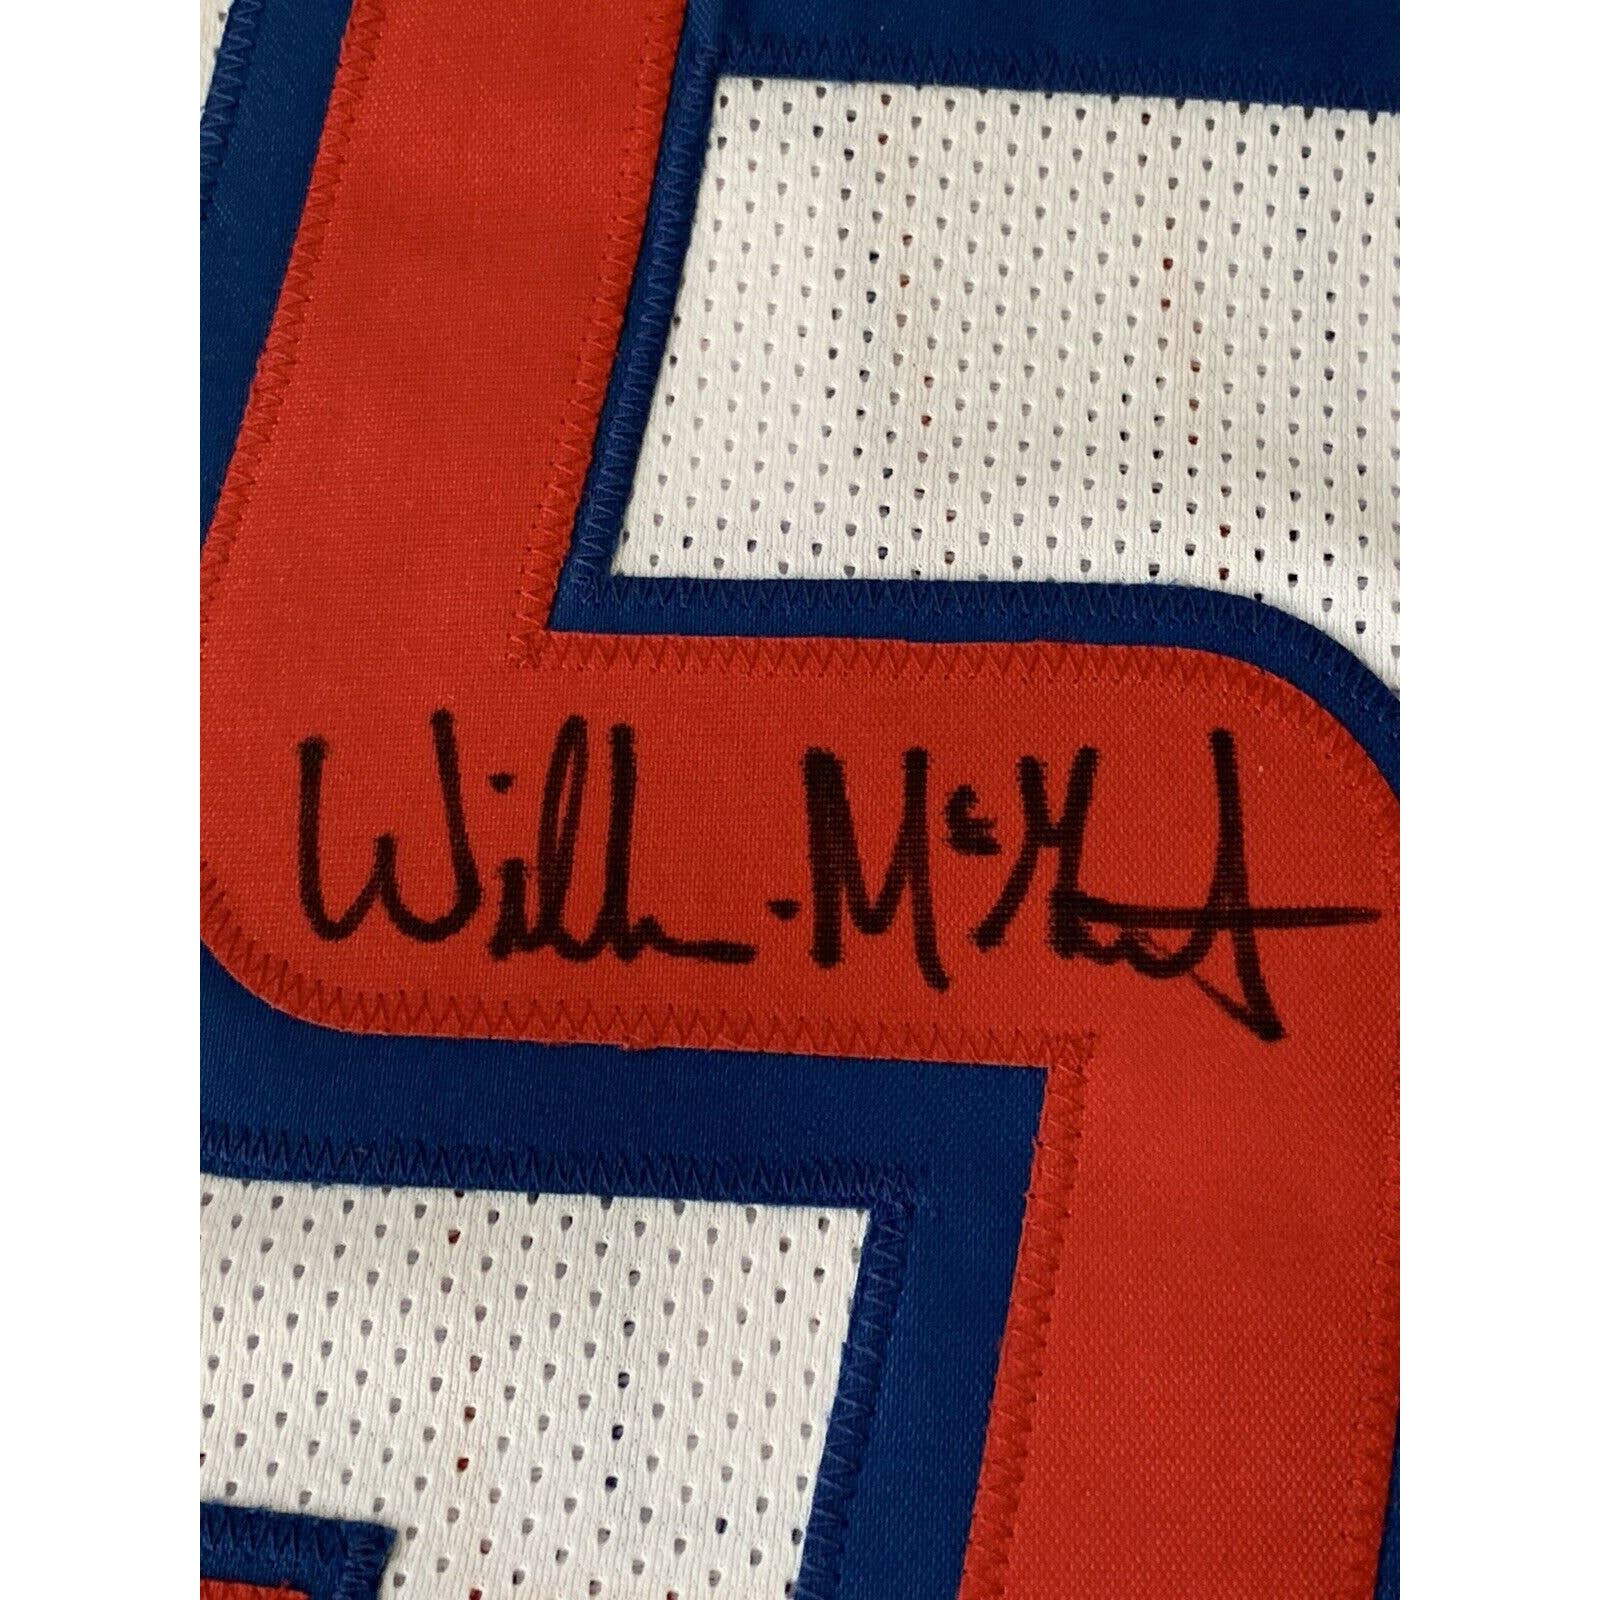 Willie McGinest Autographed/Signed Jersey Beckett COA New England Patriots - TreasuresEvolved